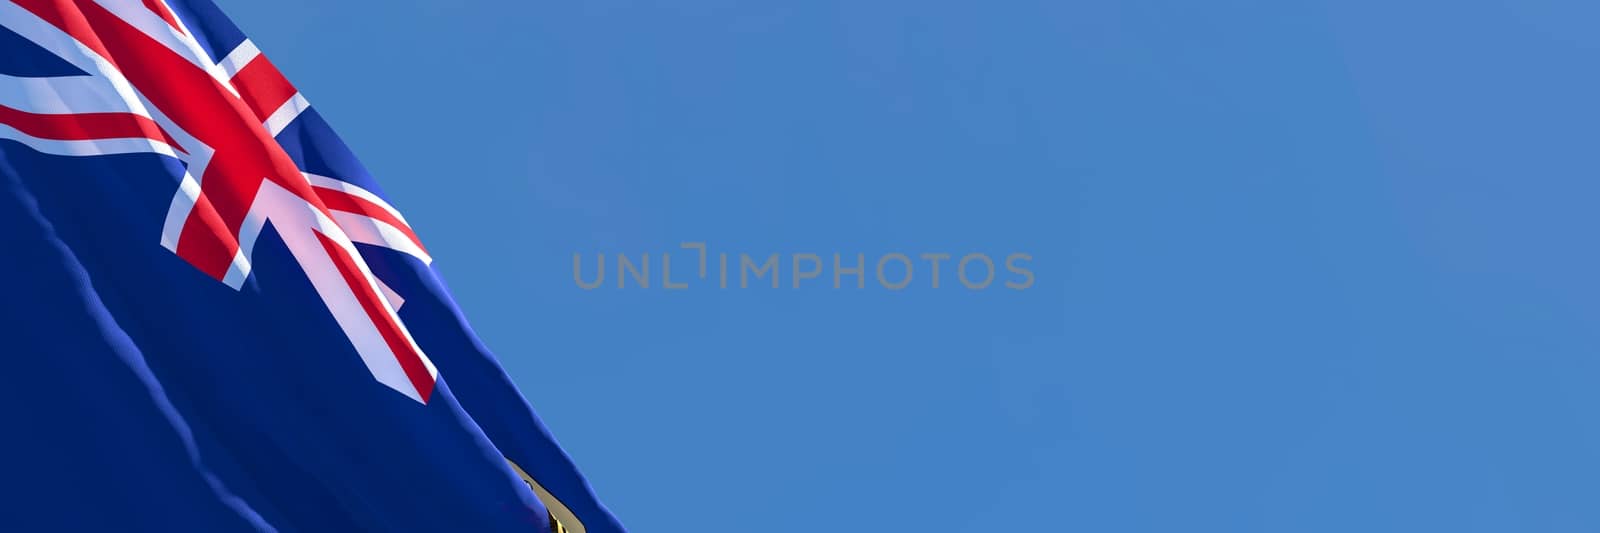 3D rendering of the national flag of Saint Helena waving in the wind against a blue sky